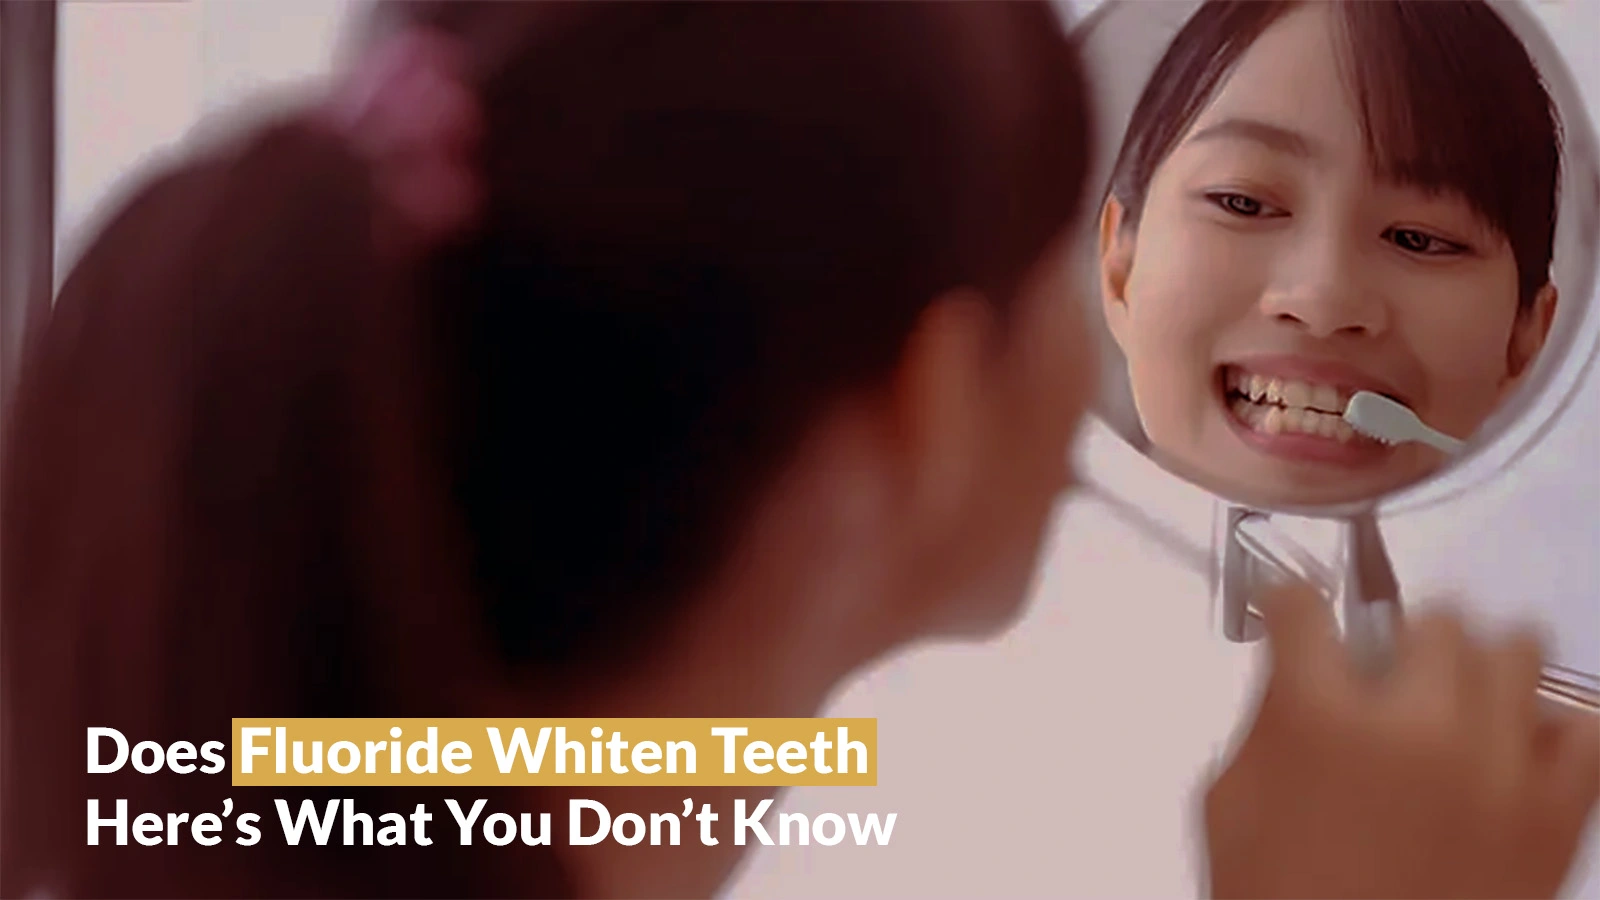 Does Fluoride Whiten Teeth: Here’s What You Don’t Know!